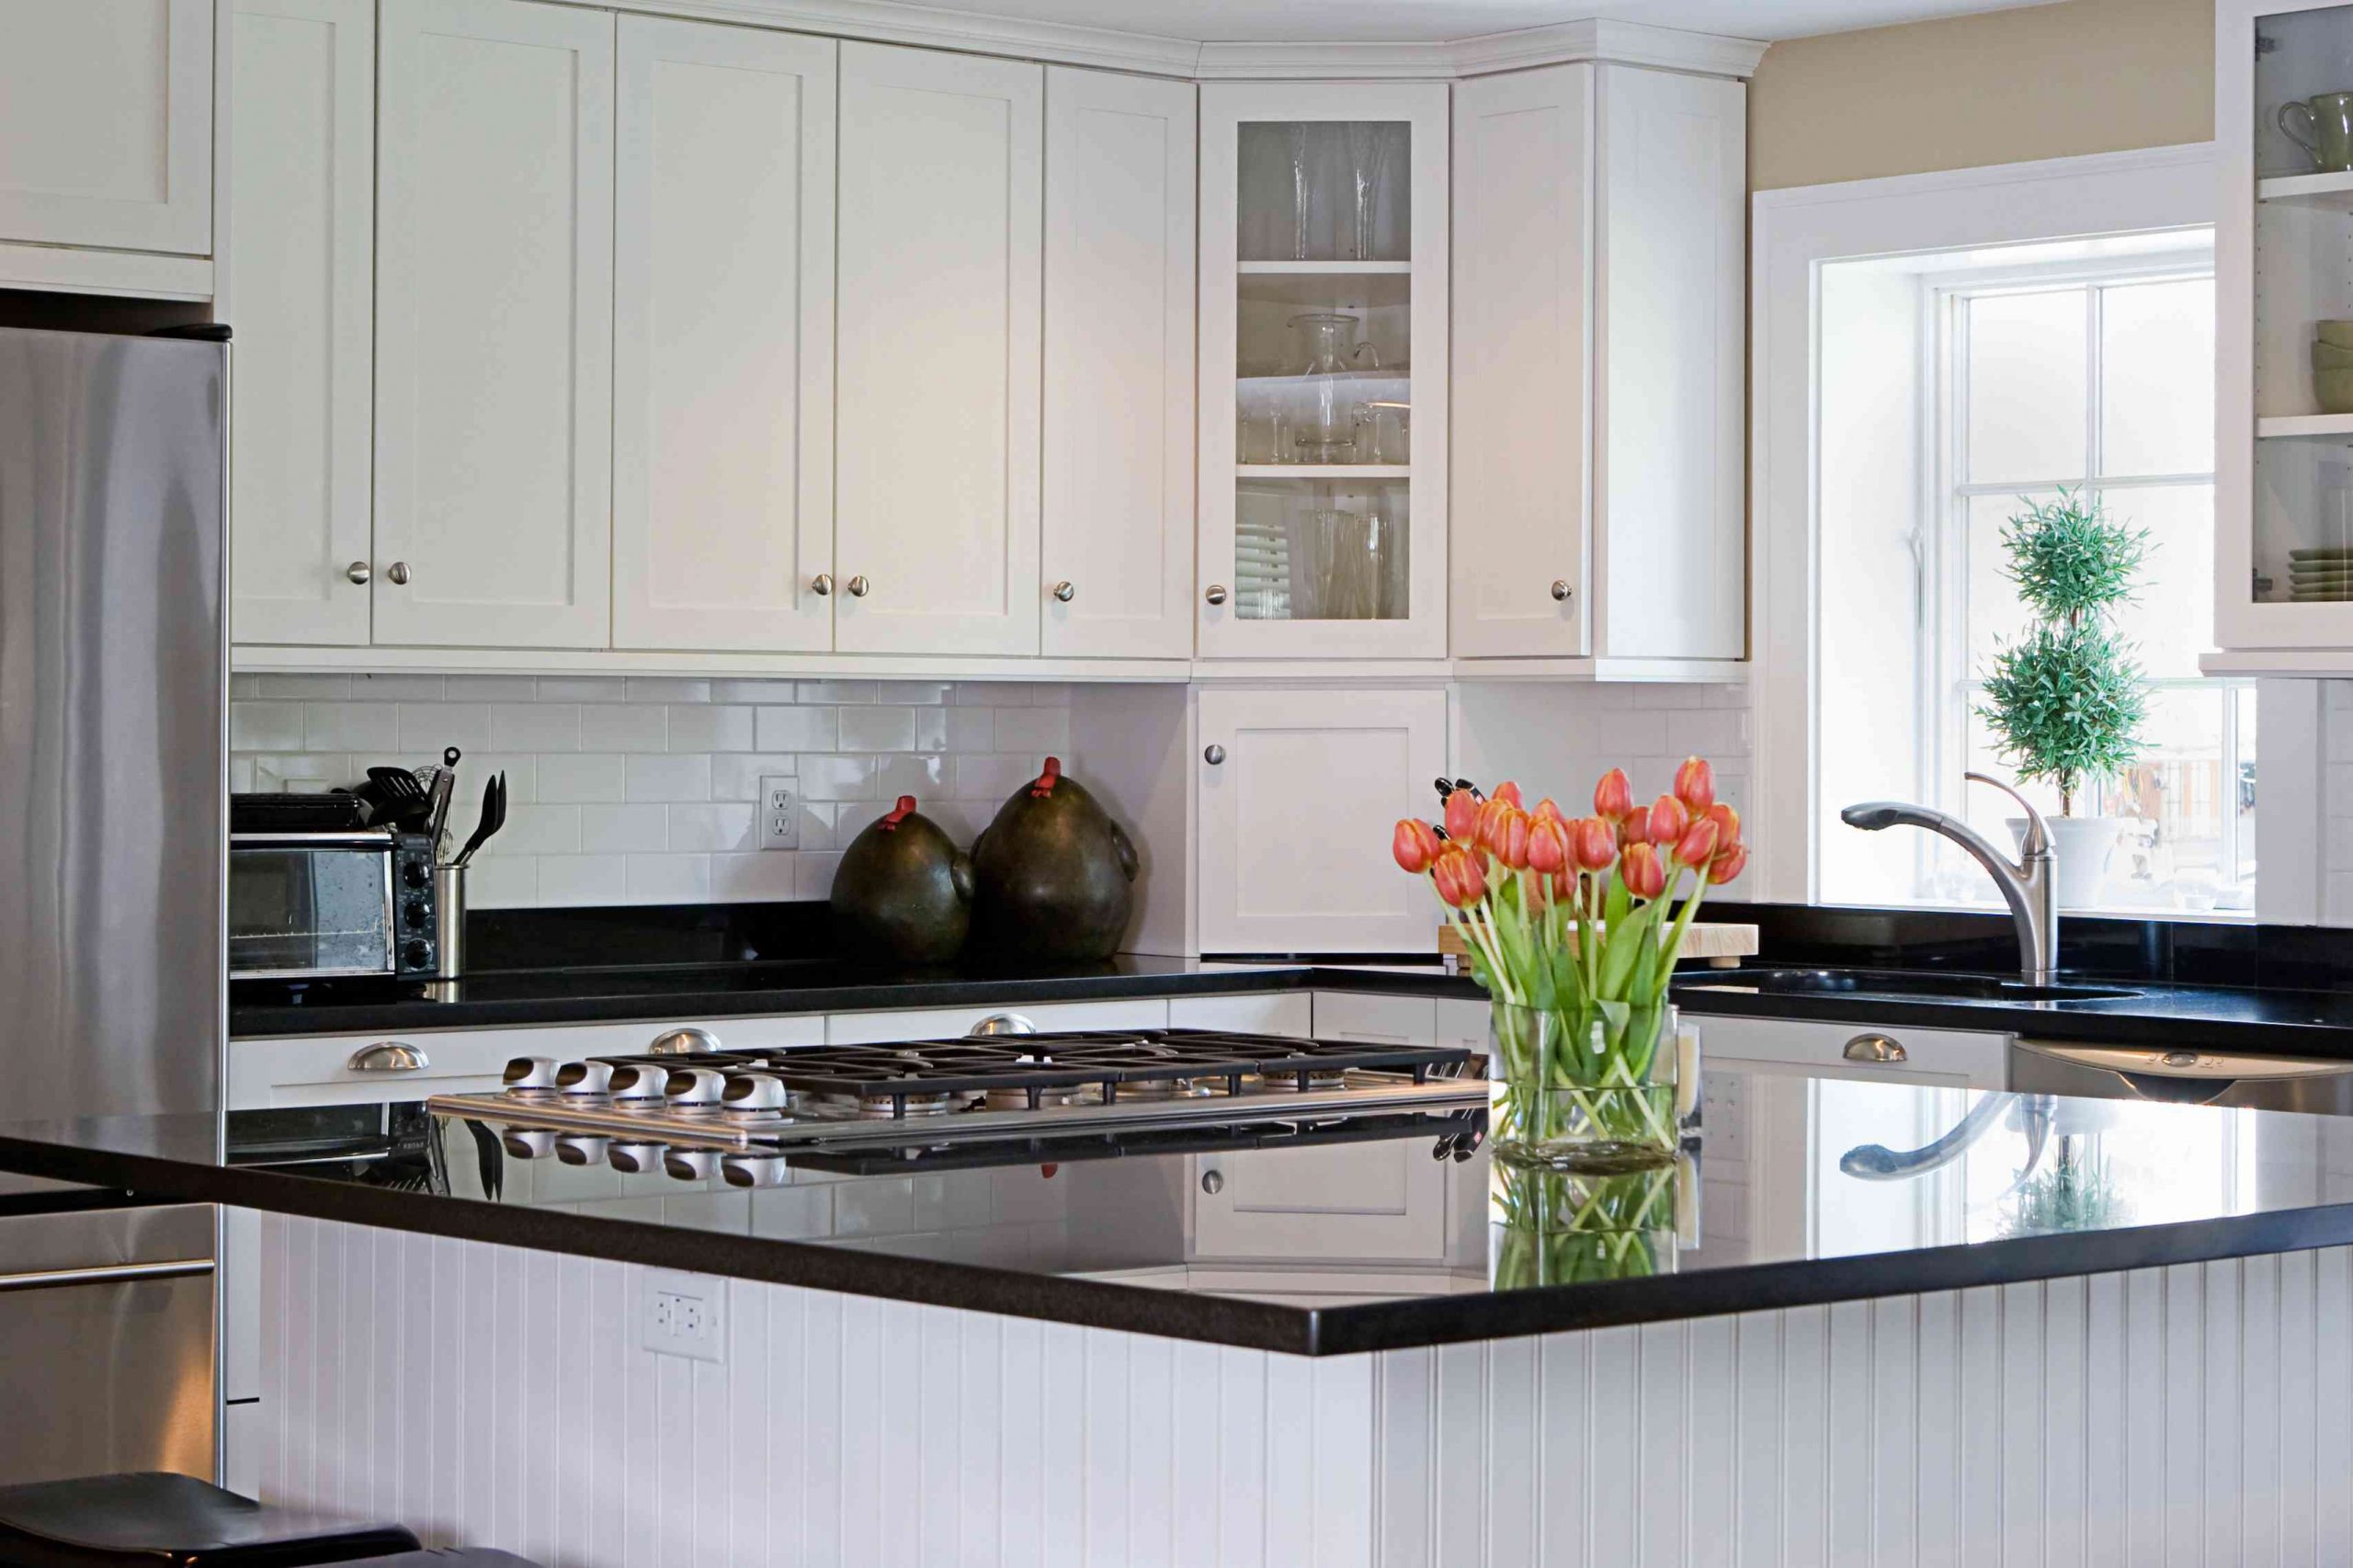 How to Match Your Kitchen Appliances to Granite Countertops